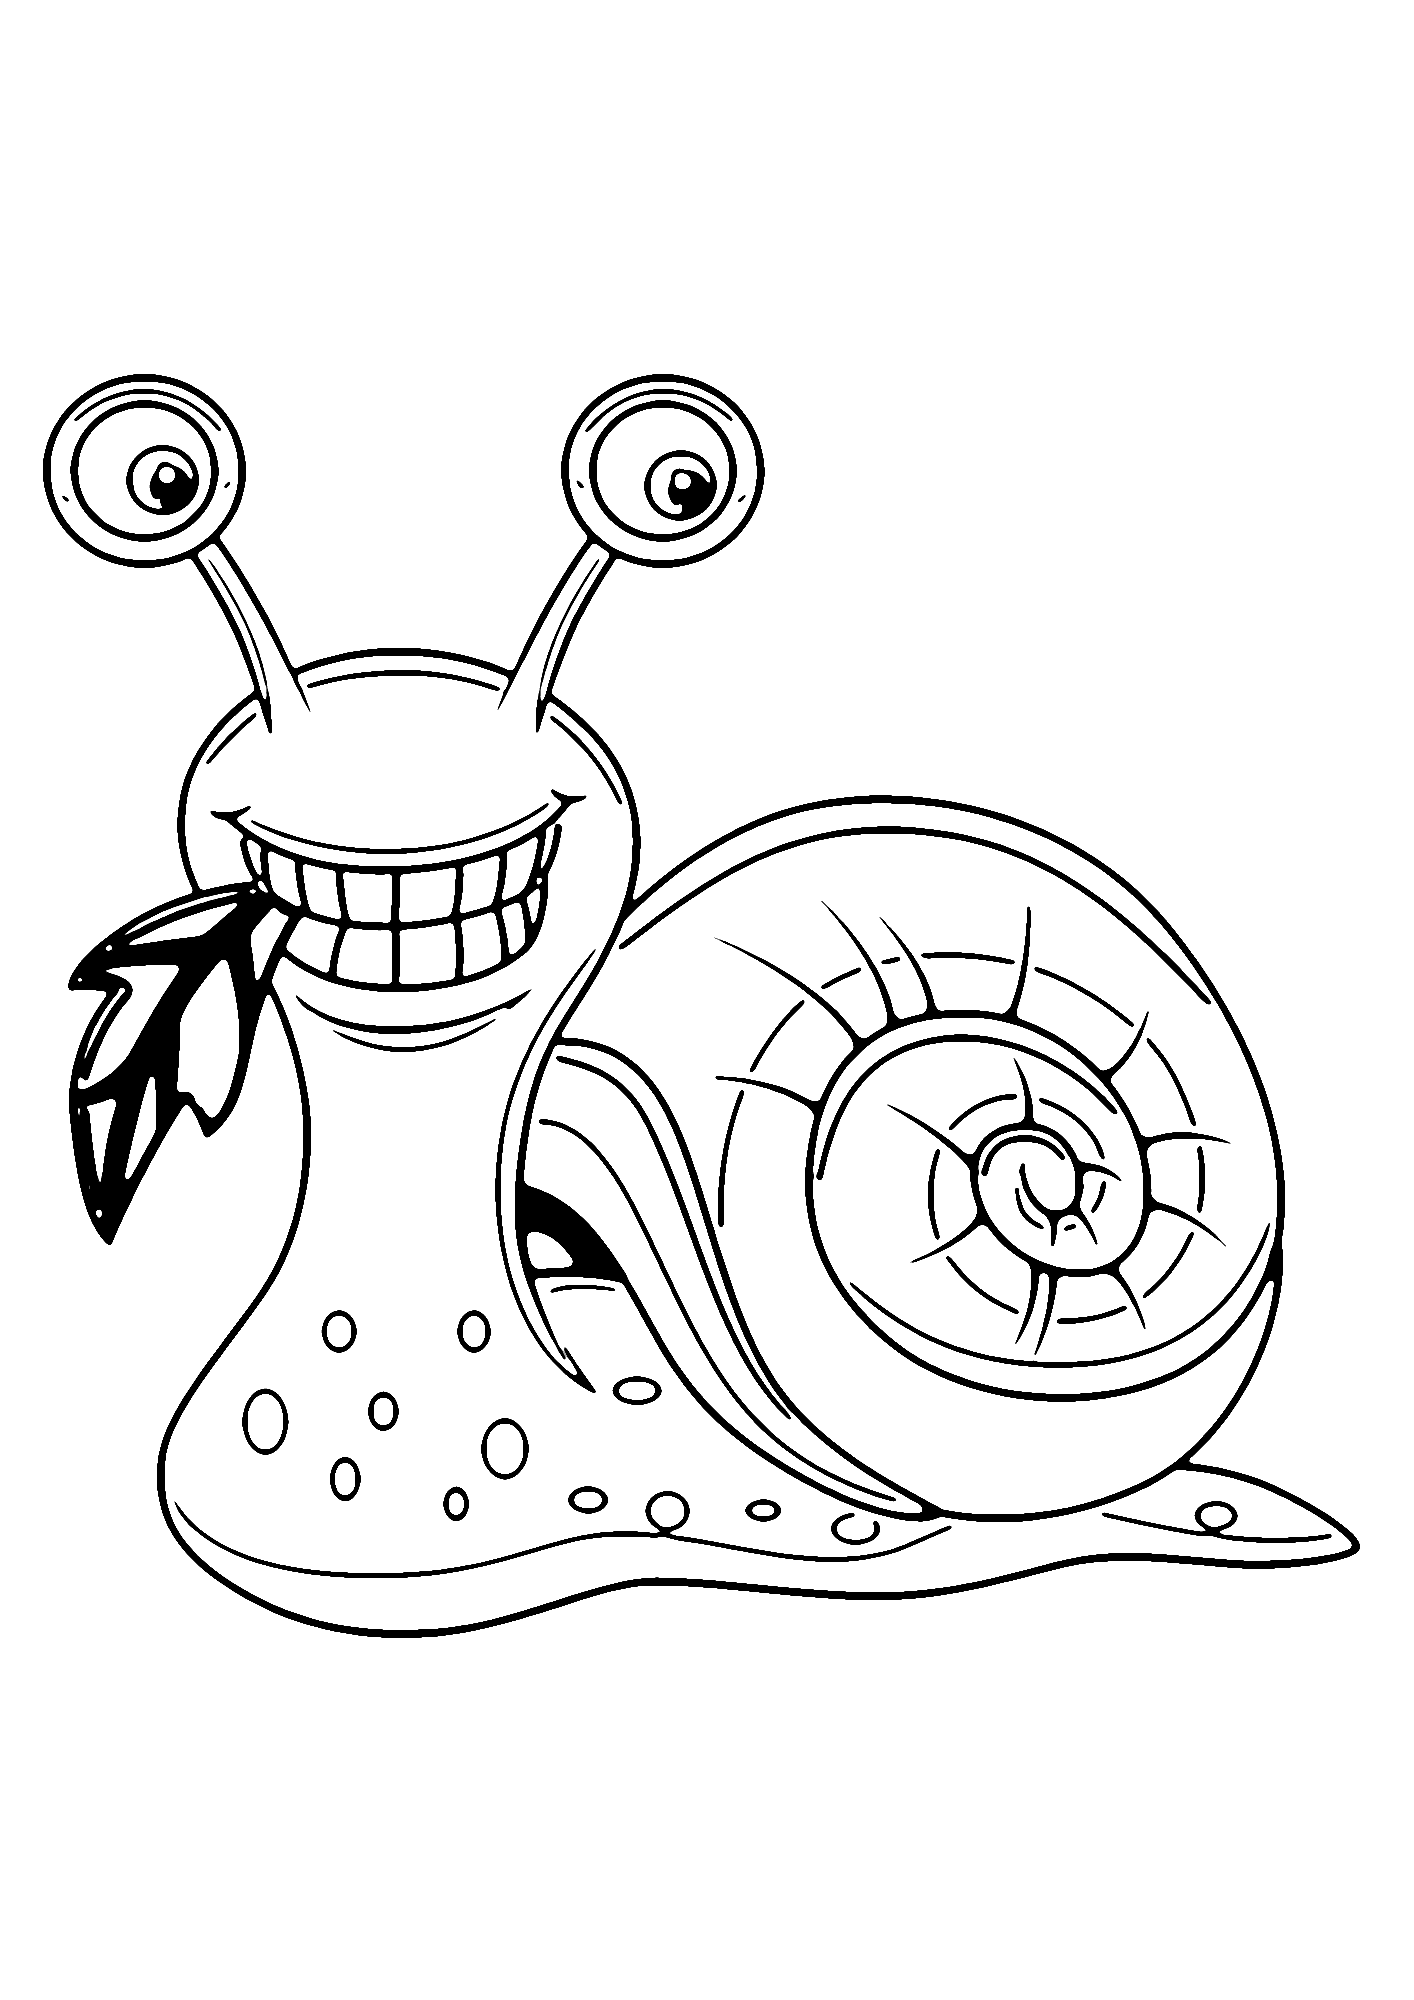 Snail Funny Coloring Pages